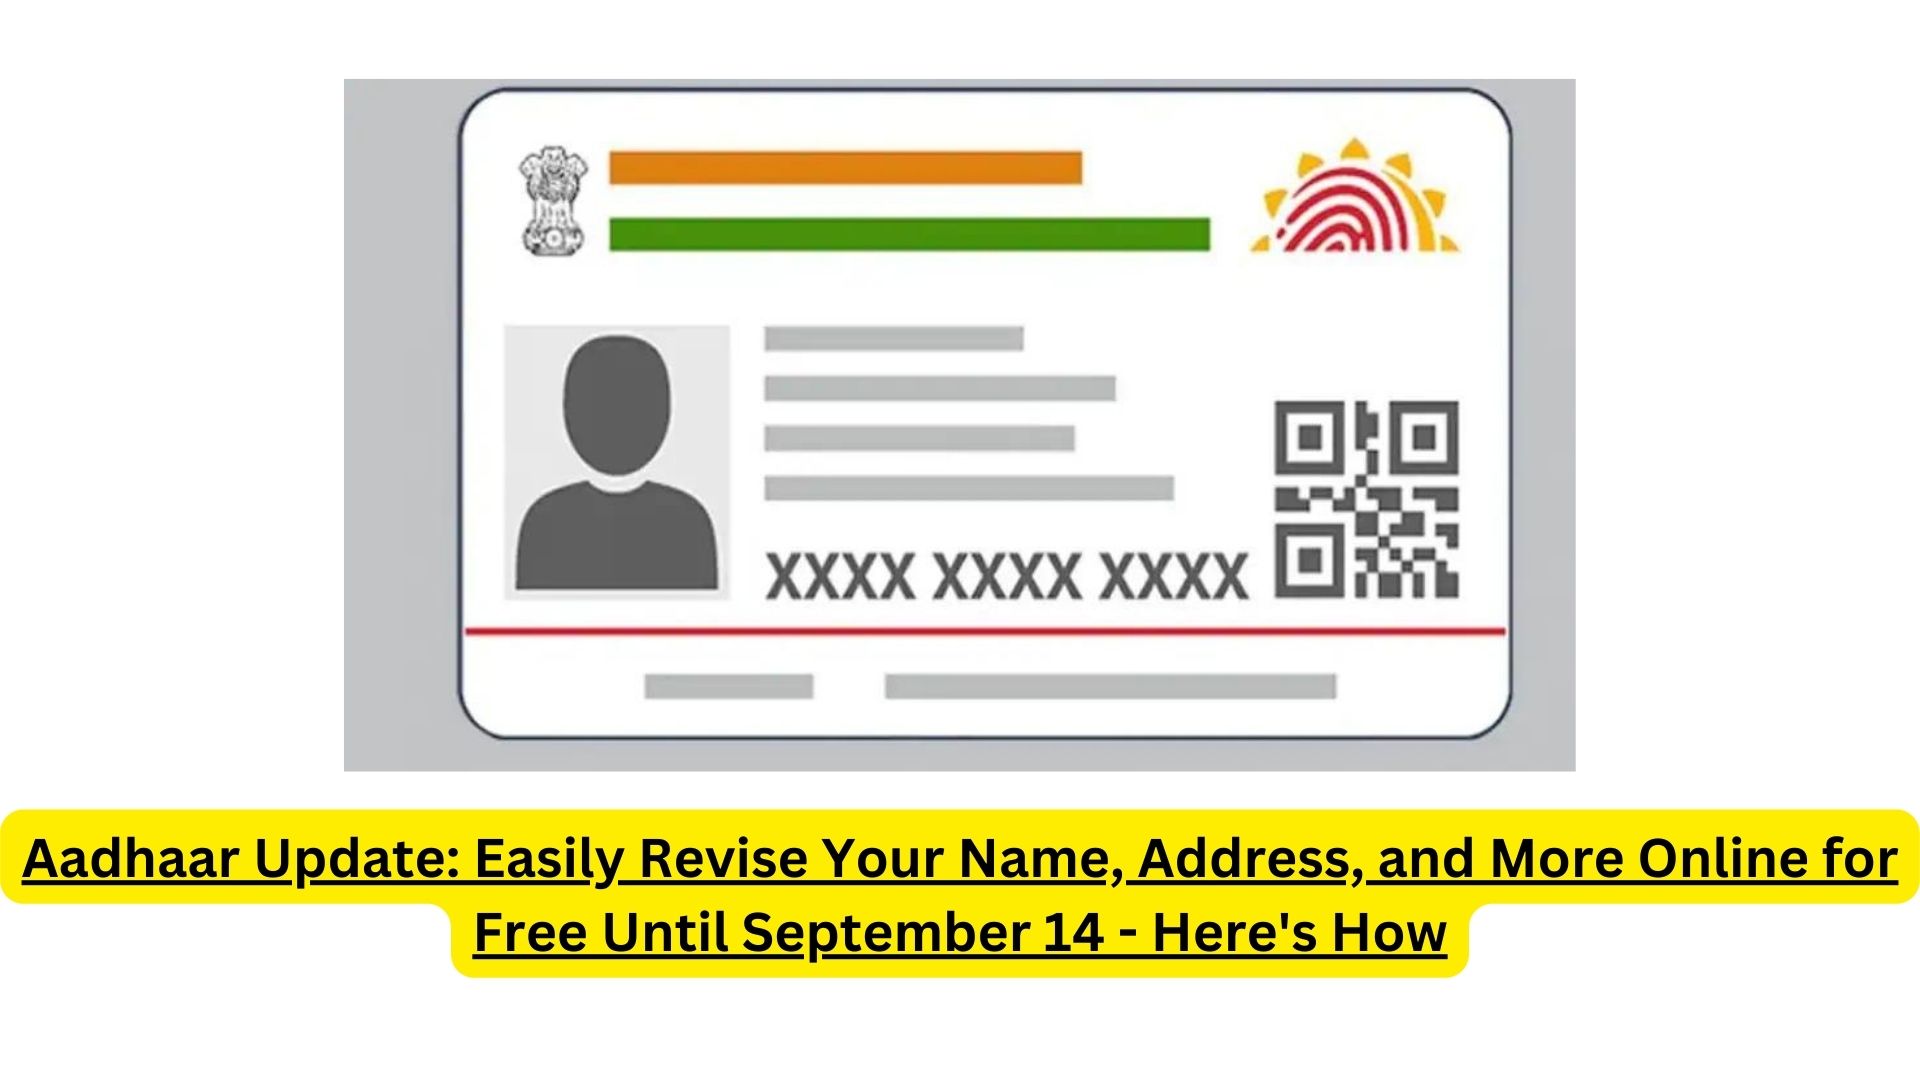 Aadhaar Update: Easily Revise Your Name, Address, and More Online for Free Until September 14 - Here's How